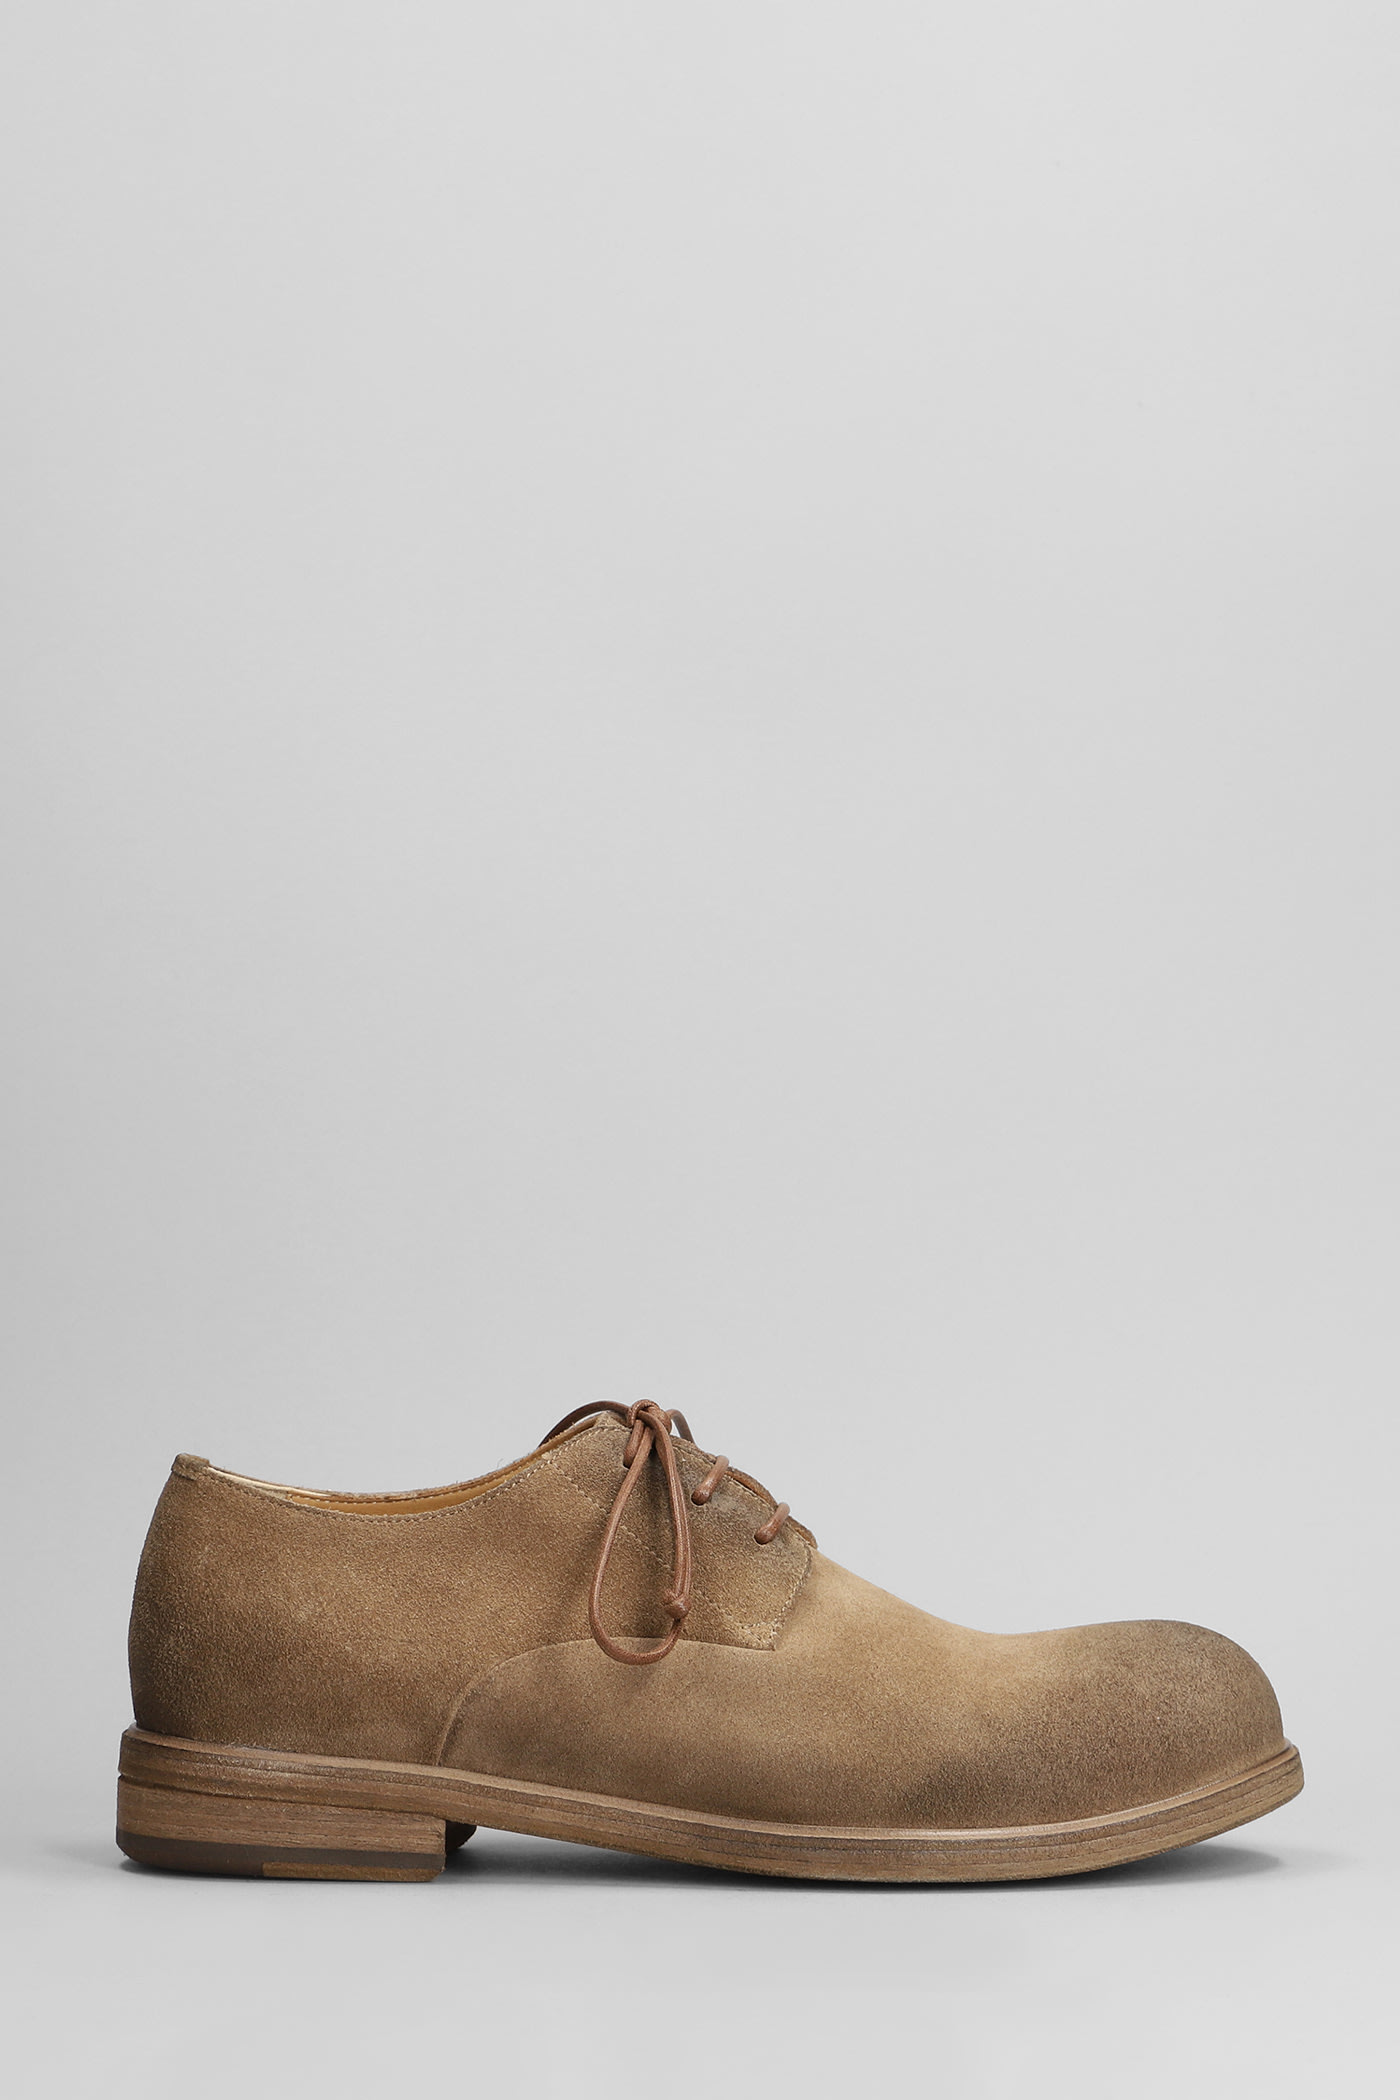 Marsèll Lace Up Shoes In Beige Suede